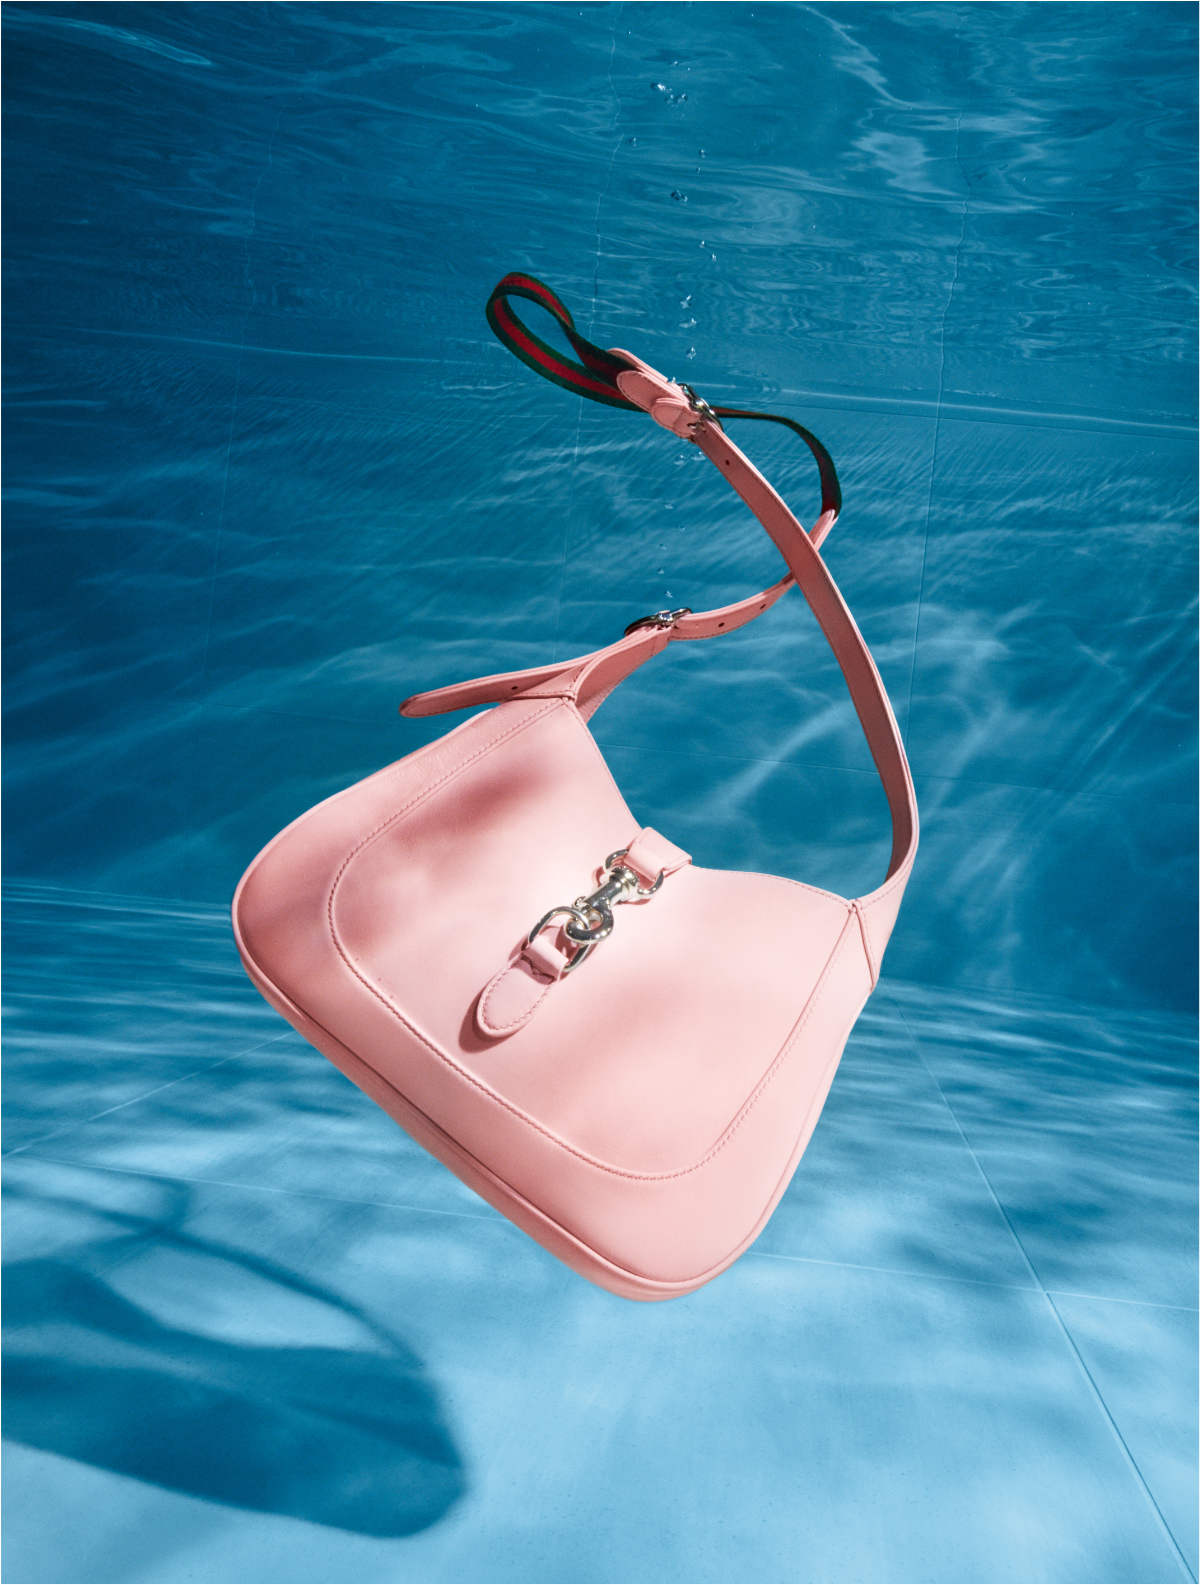 Presenting Gucci Lido, Encapsulating The Essence Of An Italian Summer